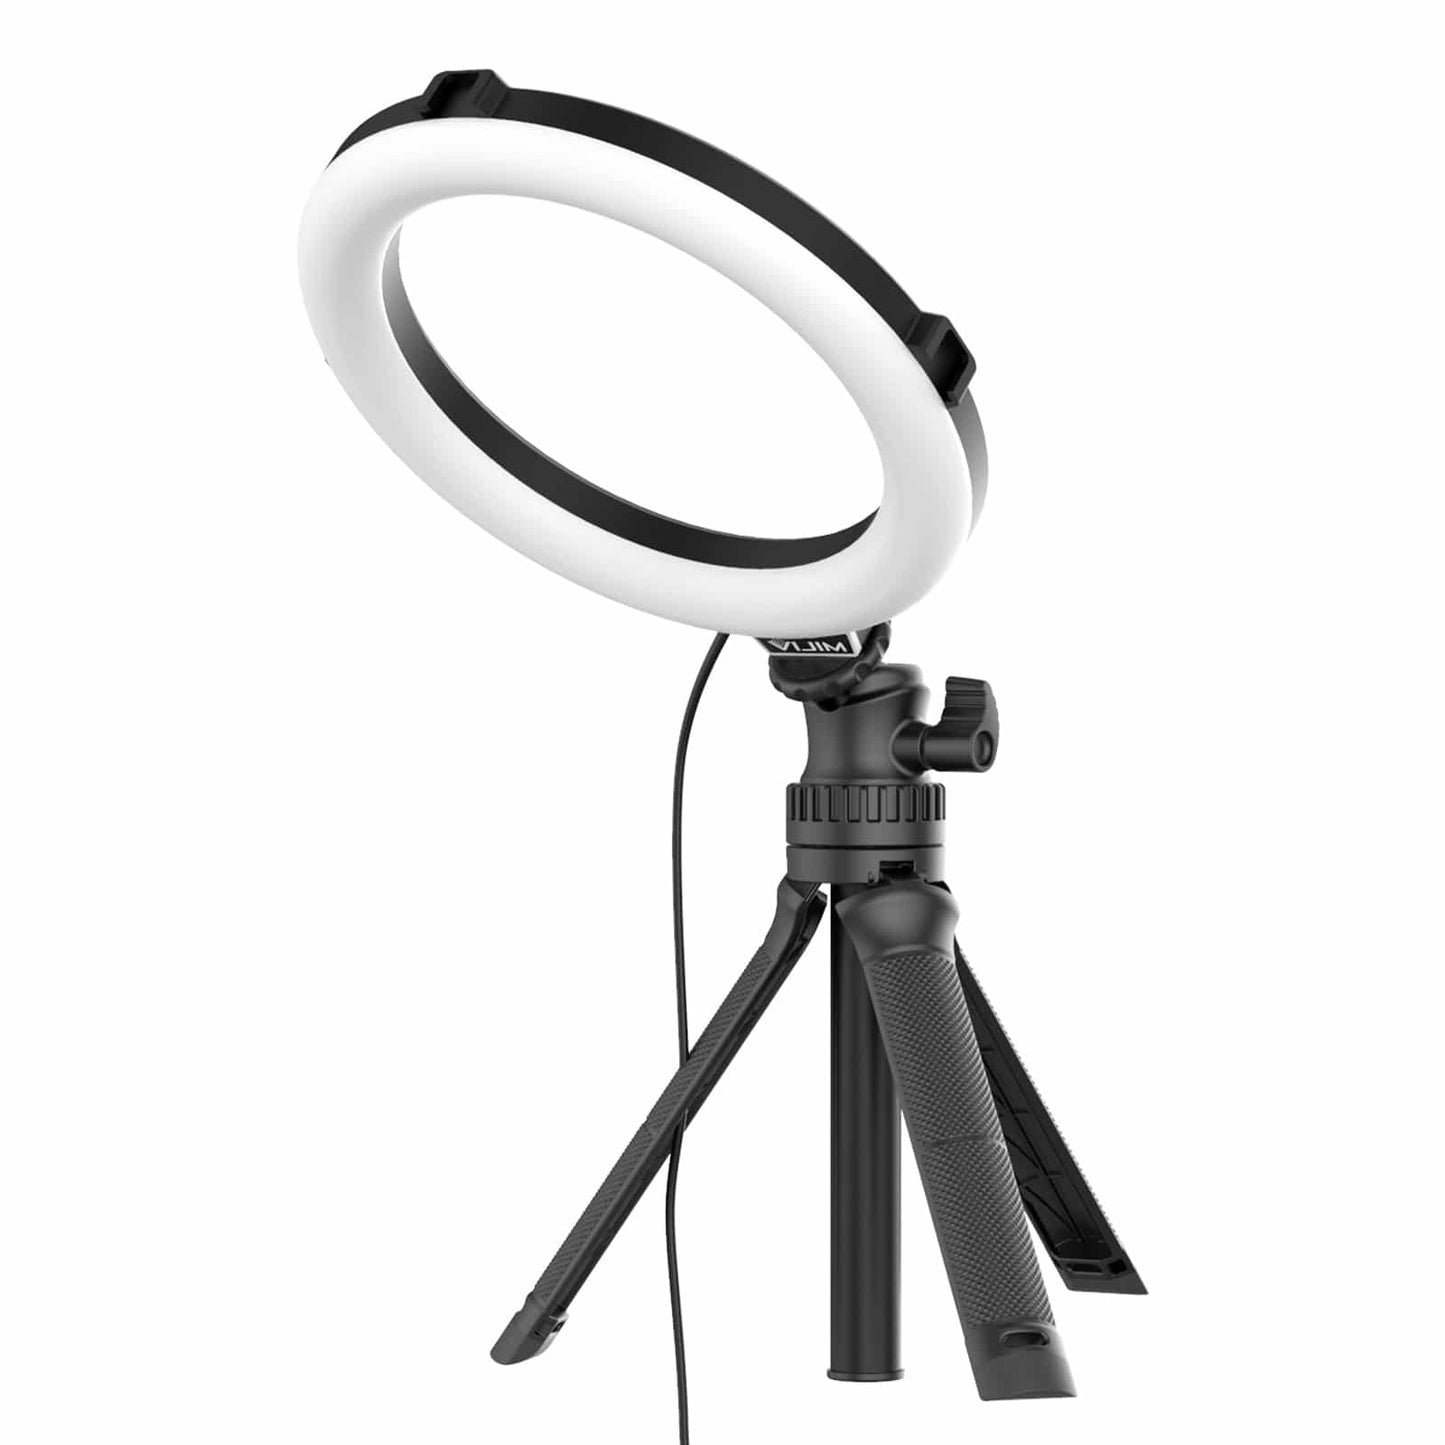 VIJIM K9 RGB Ring Lamp with Selfie Stick Tripod and Phone Holder - 10 Colors